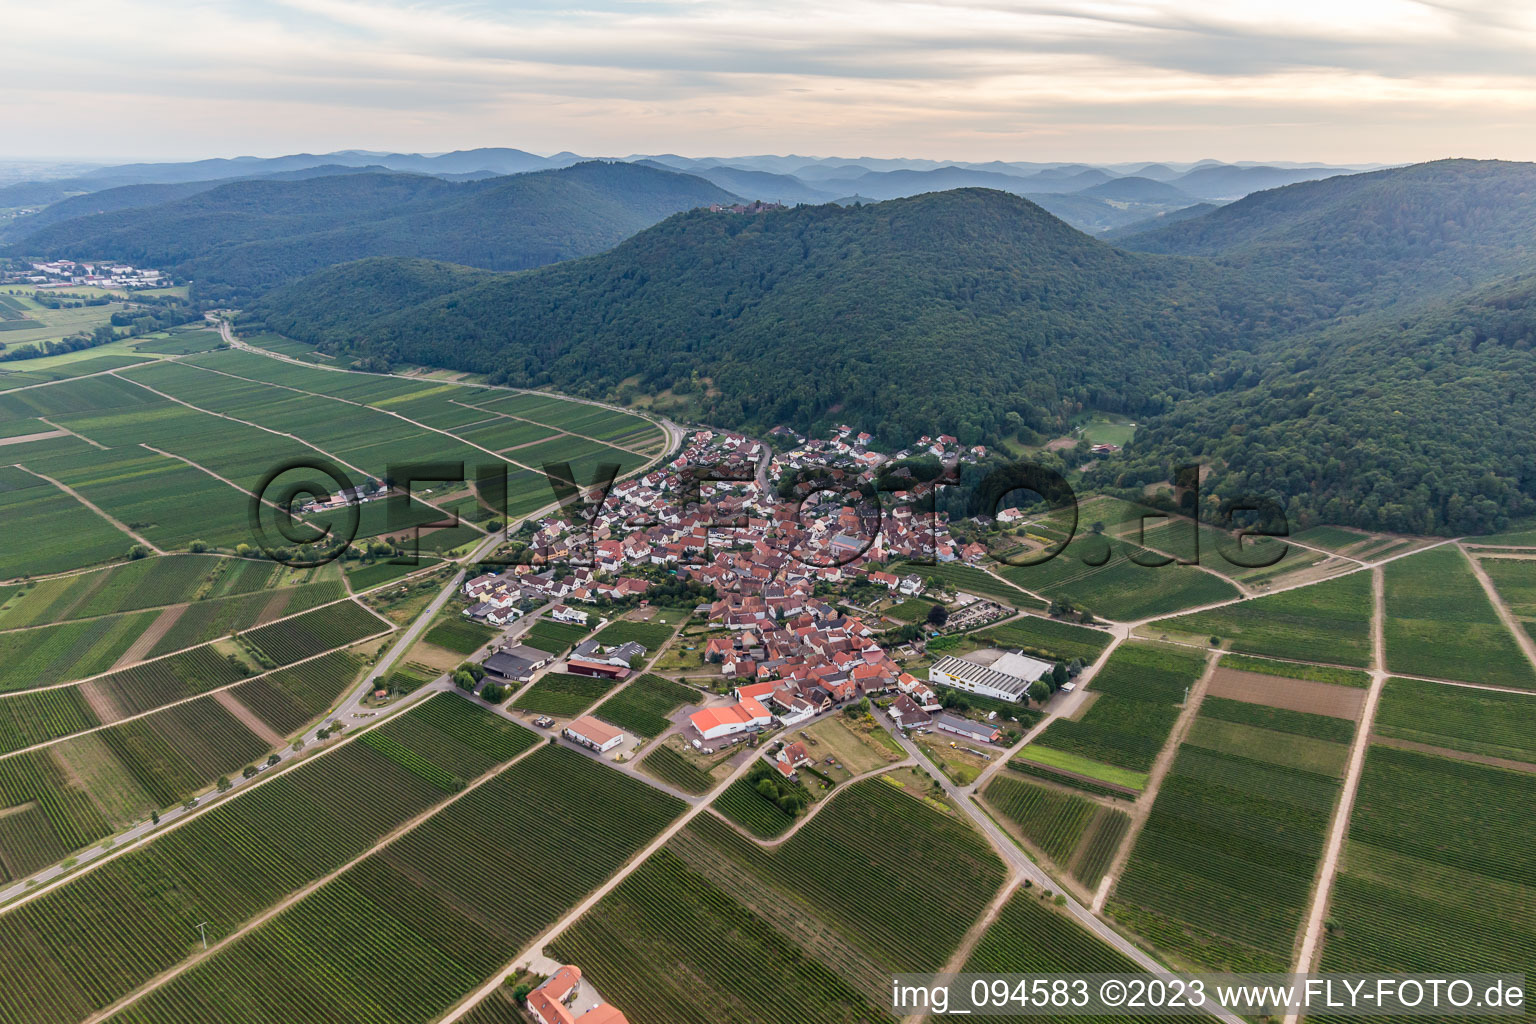 Eschbach in the state Rhineland-Palatinate, Germany viewn from the air